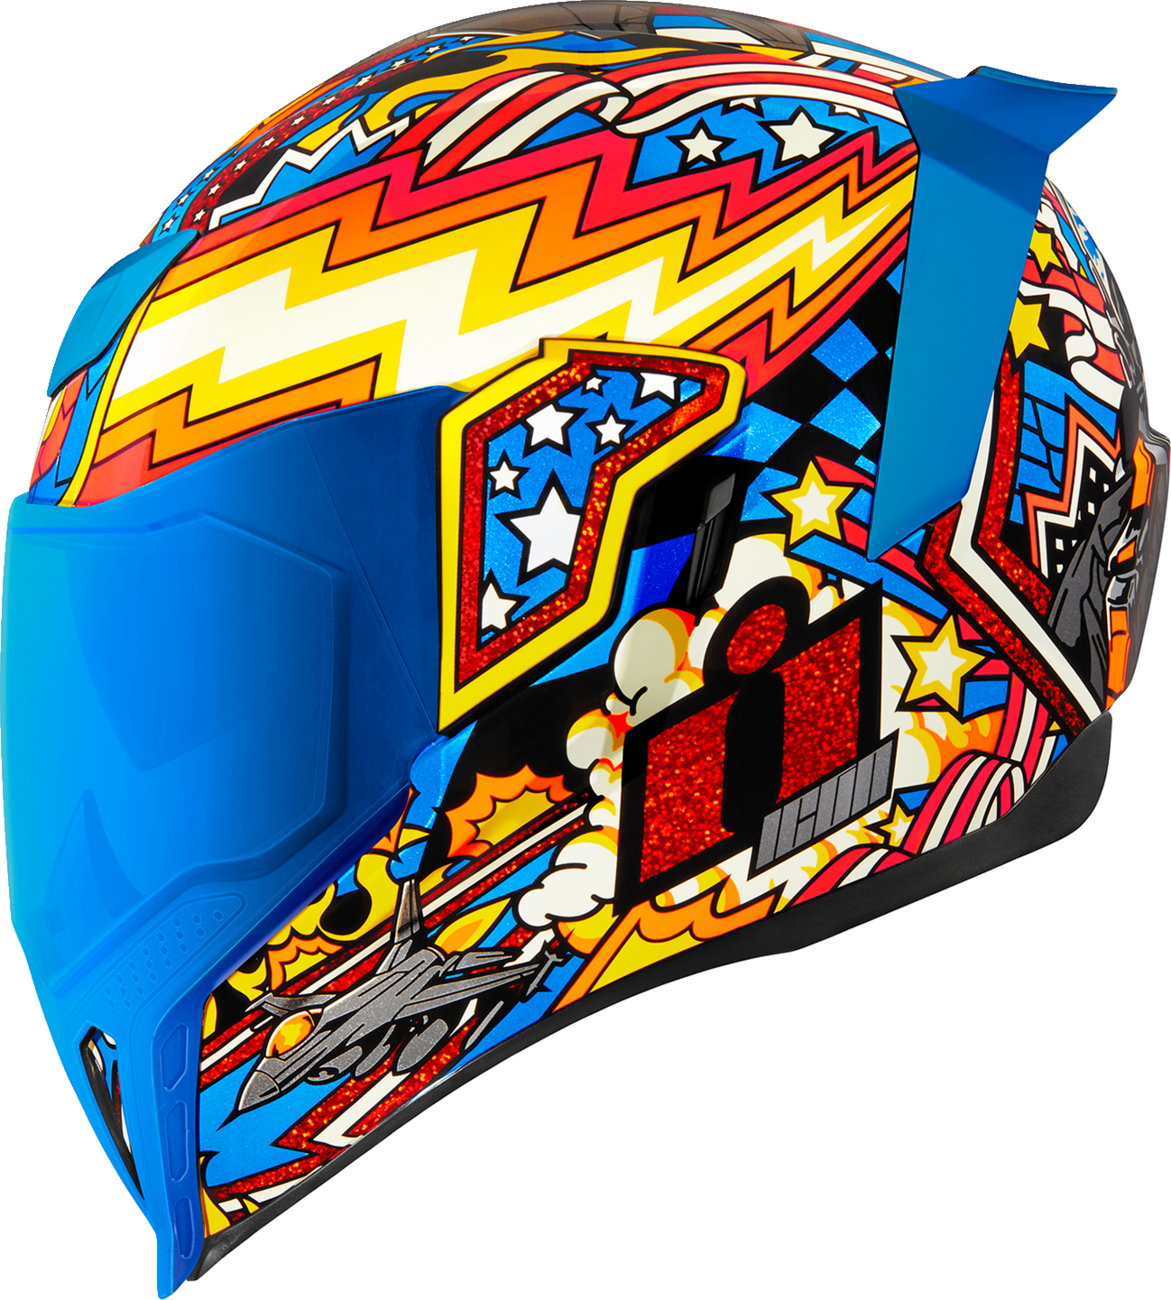 ICON Airflite™ Helmet - Flyboy - Blue - Small 0101-16011